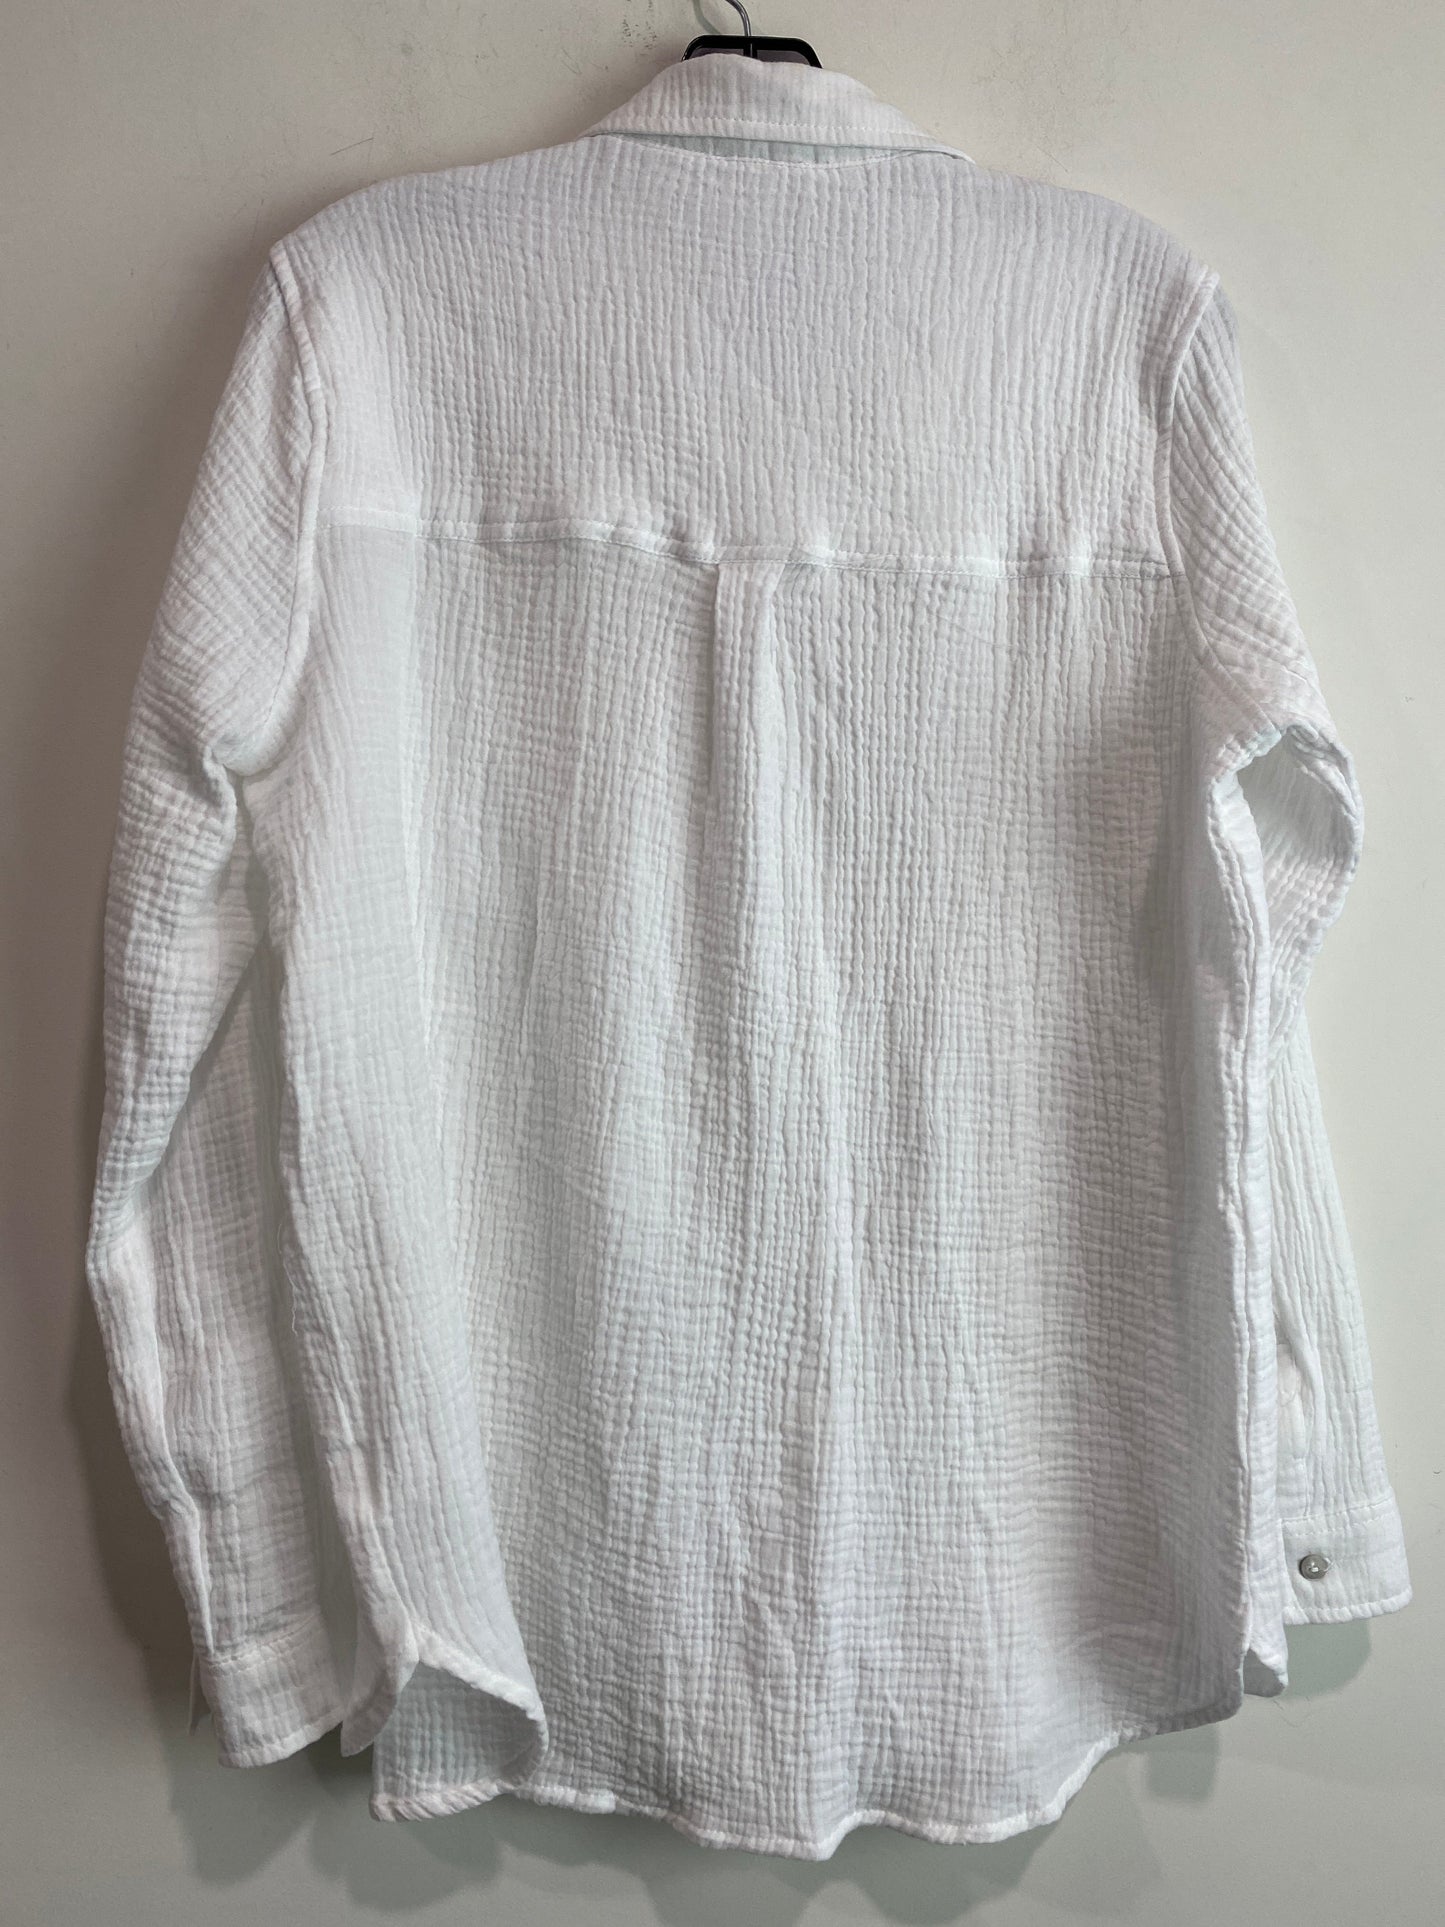 White Top Long Sleeve Jessica Simpson, Size M